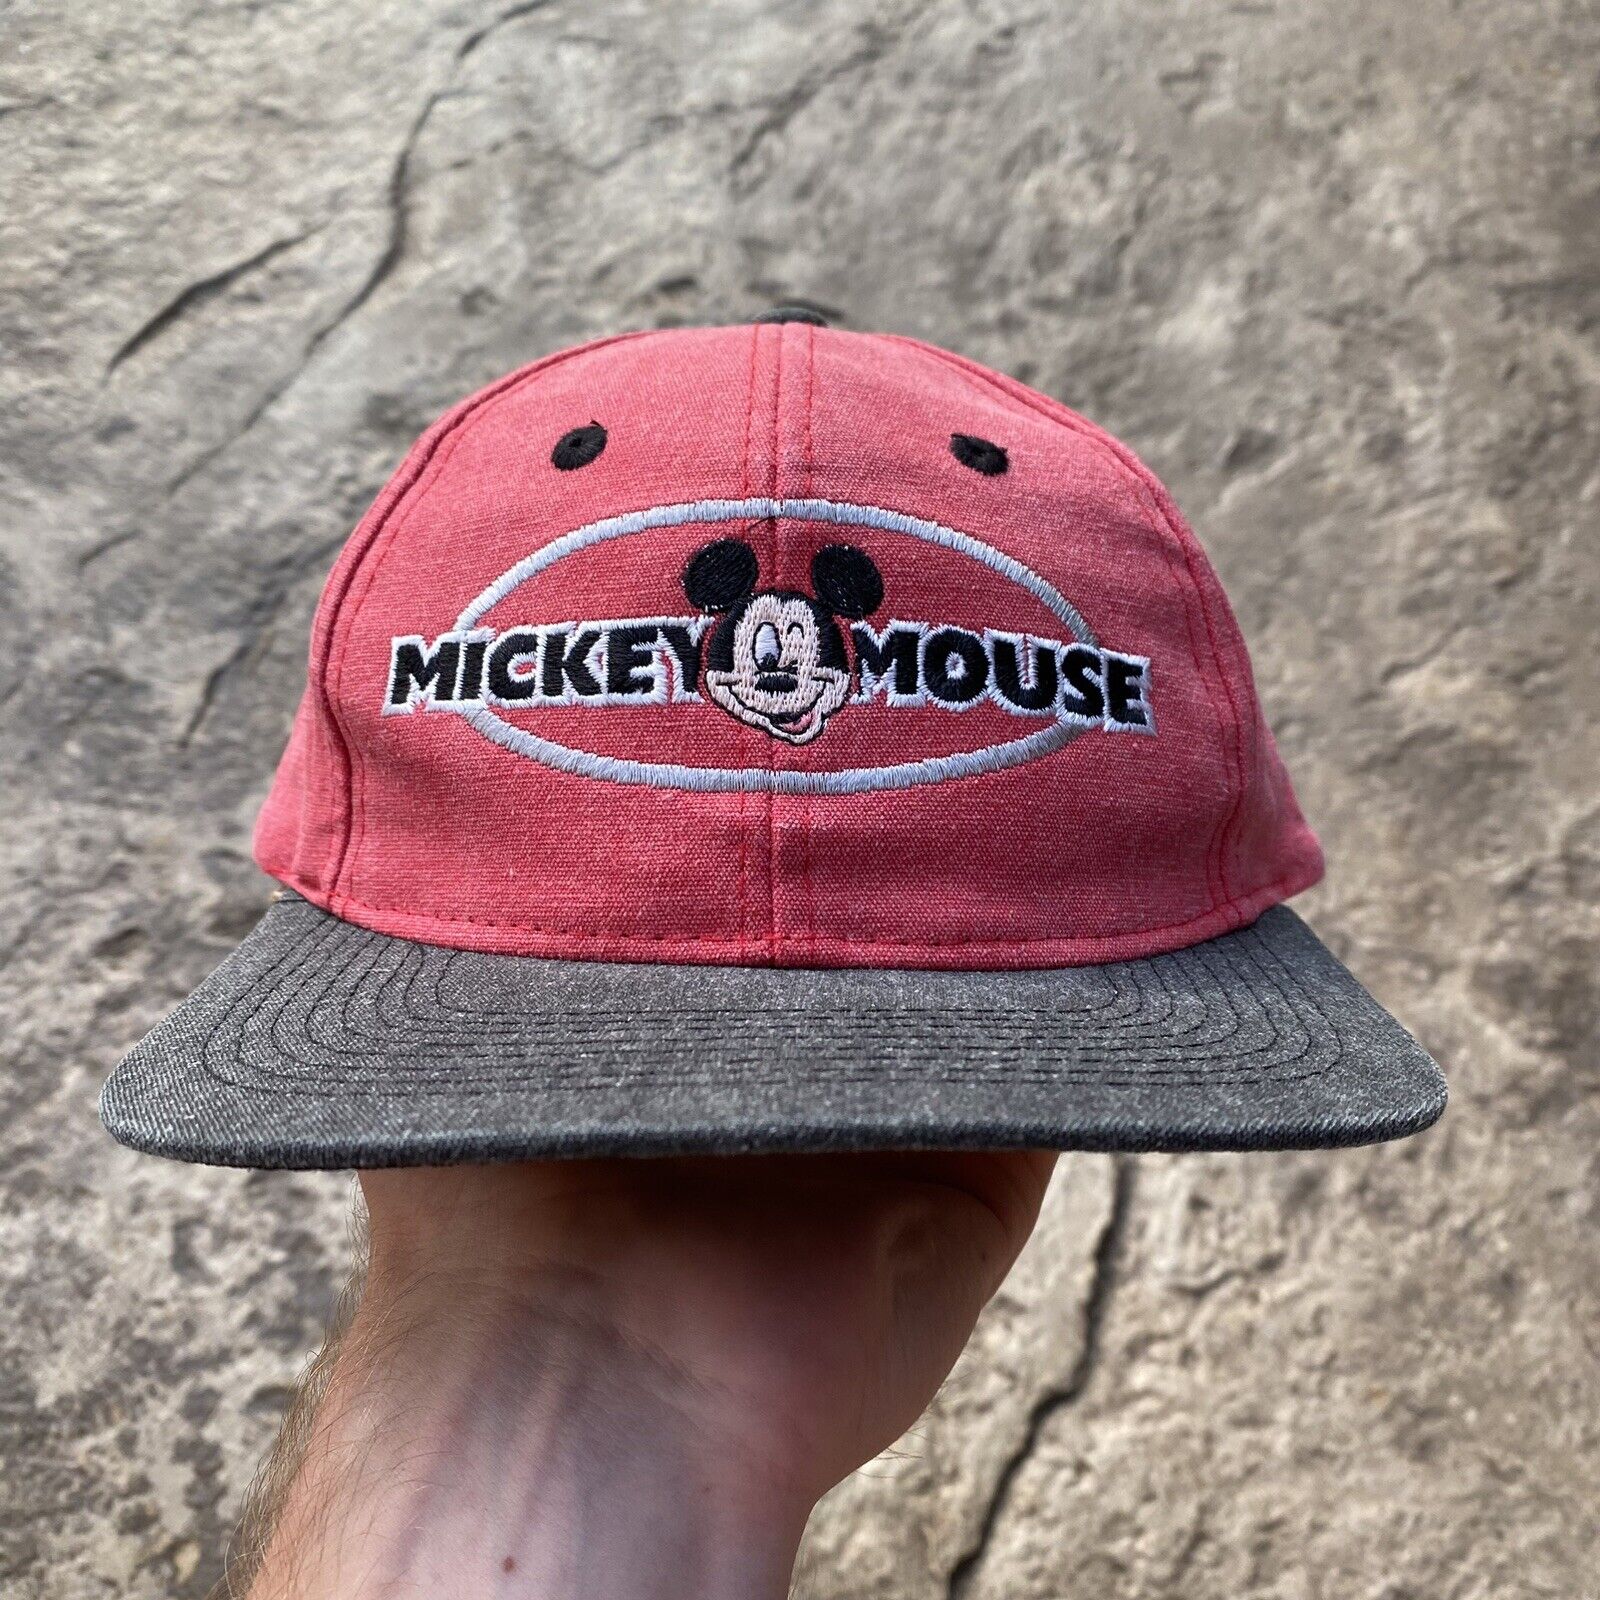 Vintage 90s Mickey Mouse Hat, Adjustable